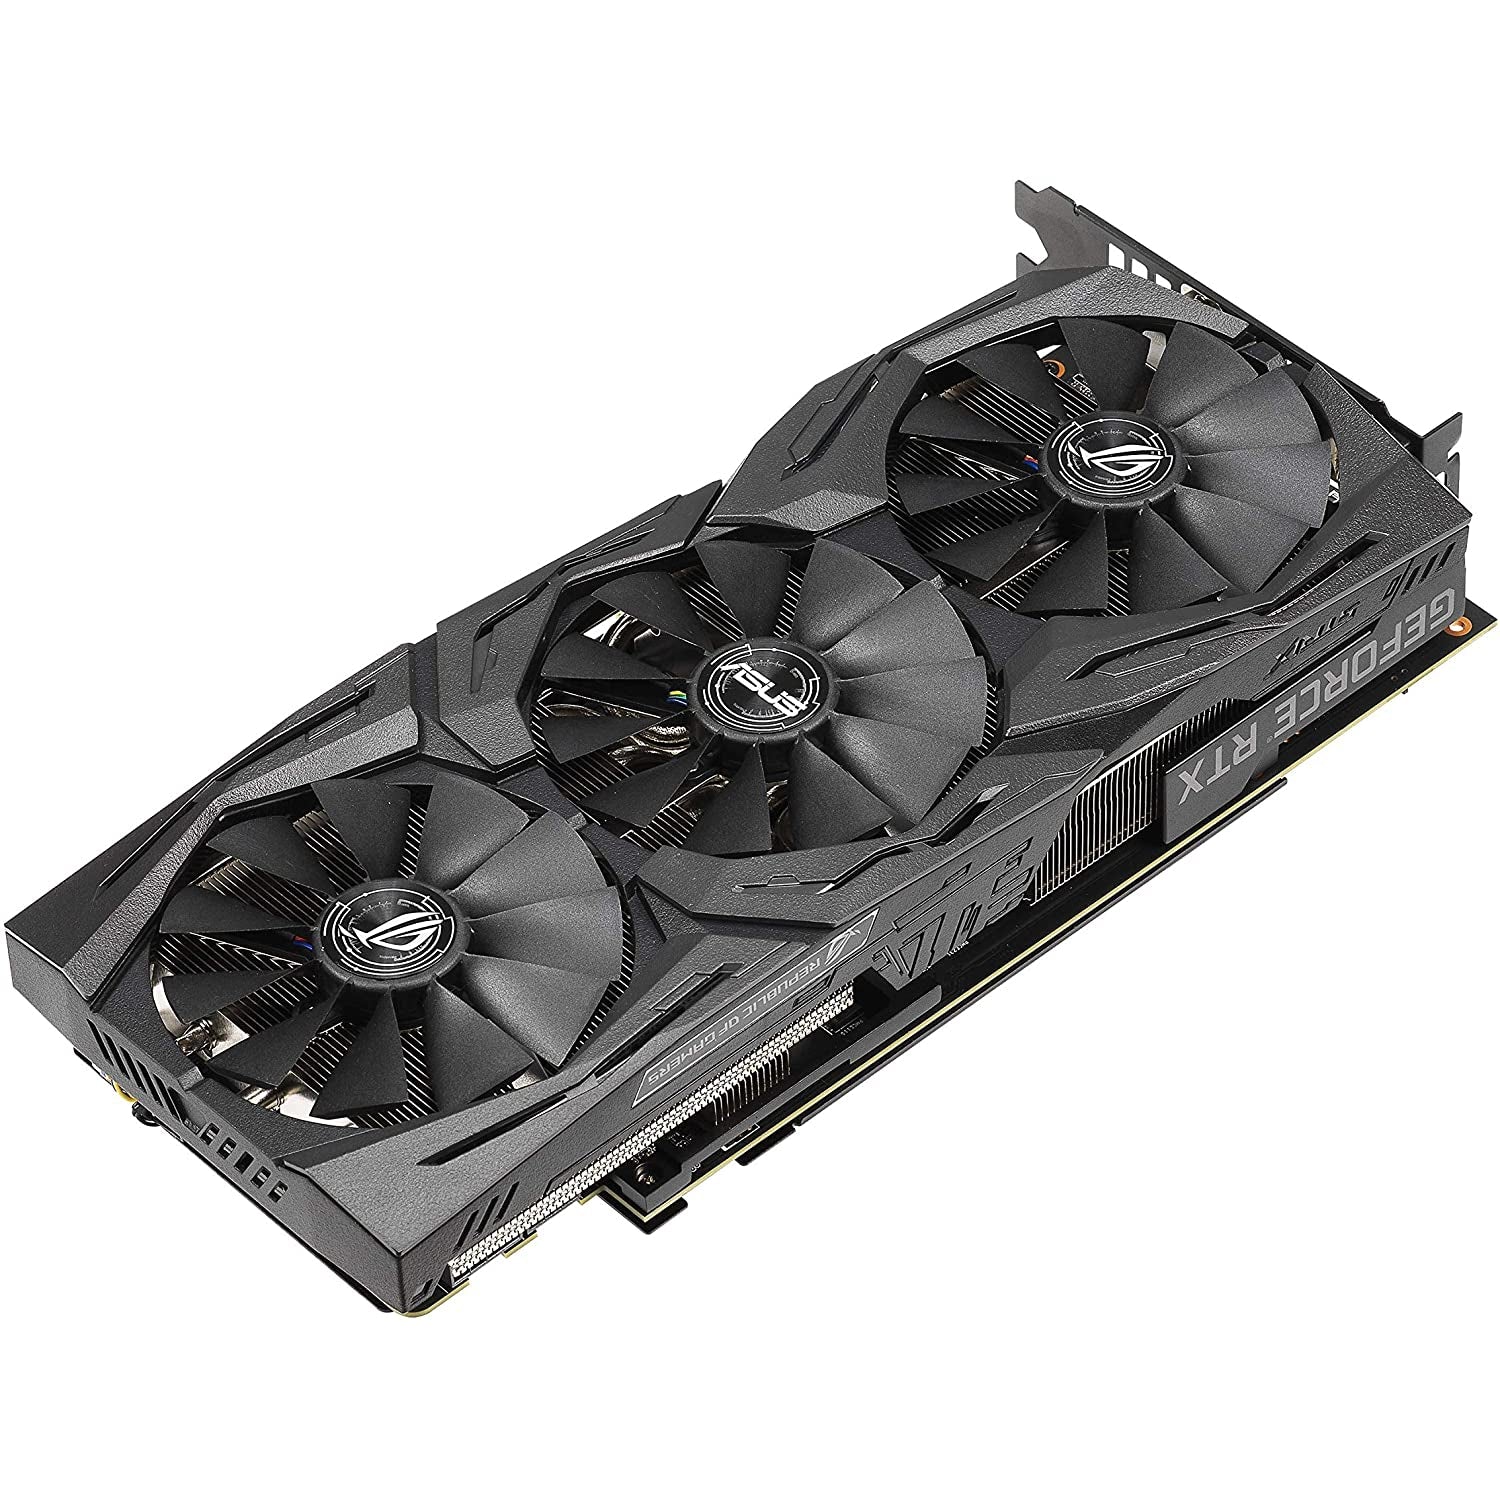 ASUS ROG-STRIX-RTX2070-O8G-Gaming ROG Strix GeForce RTX 2070 OC Edition 8 GB GDDR6 with Powerful Cooling for Higher Refresh Rates and VR Gaming